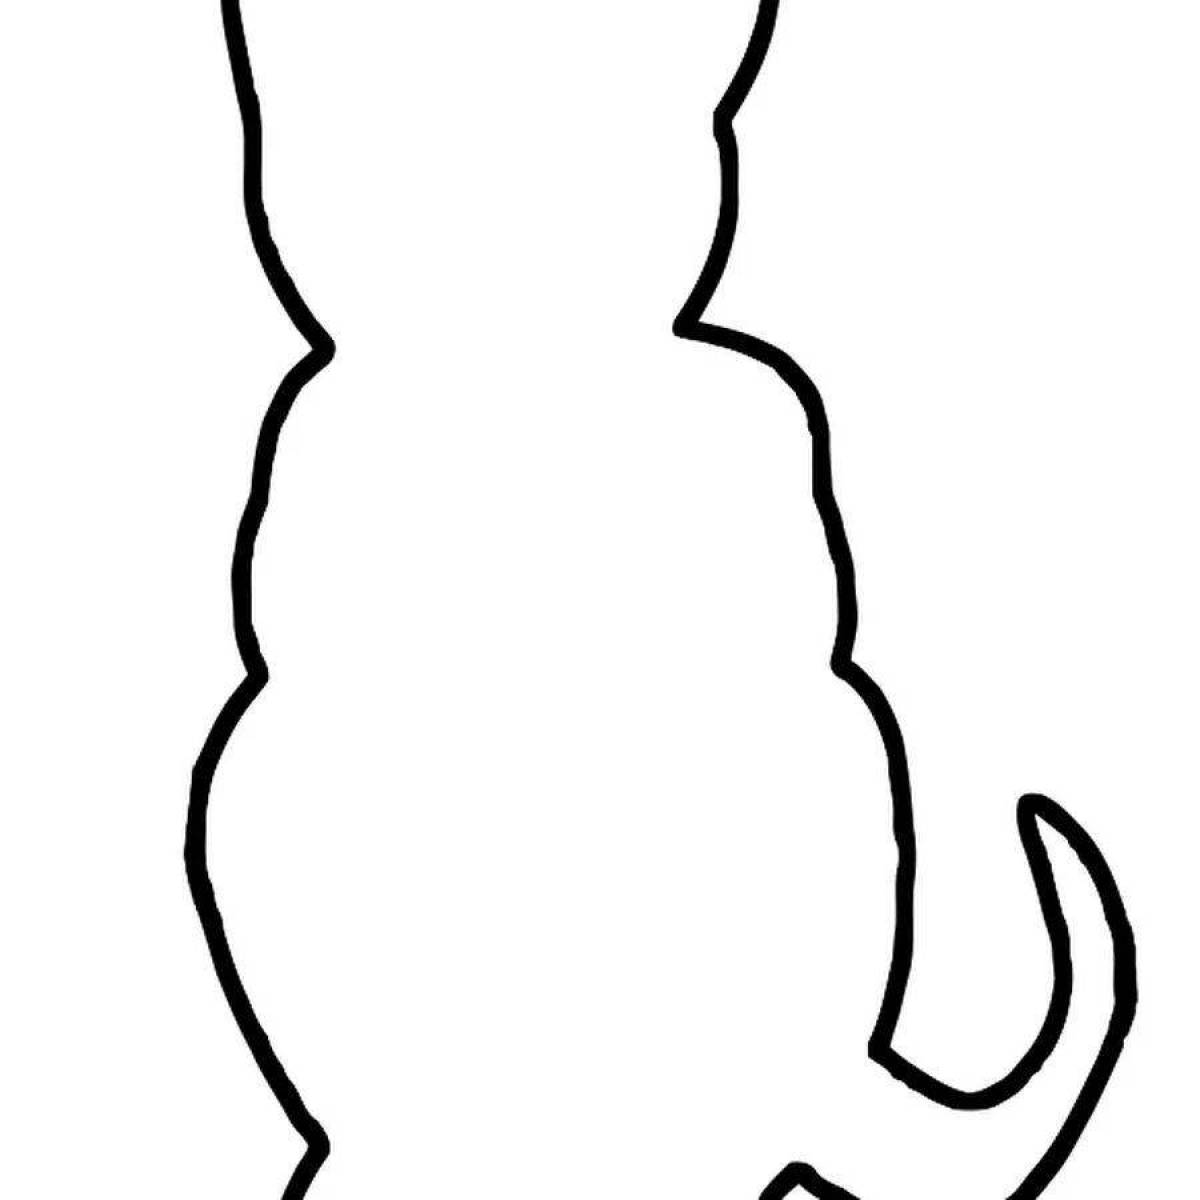 Coloring book silhouette of a cheerful cat